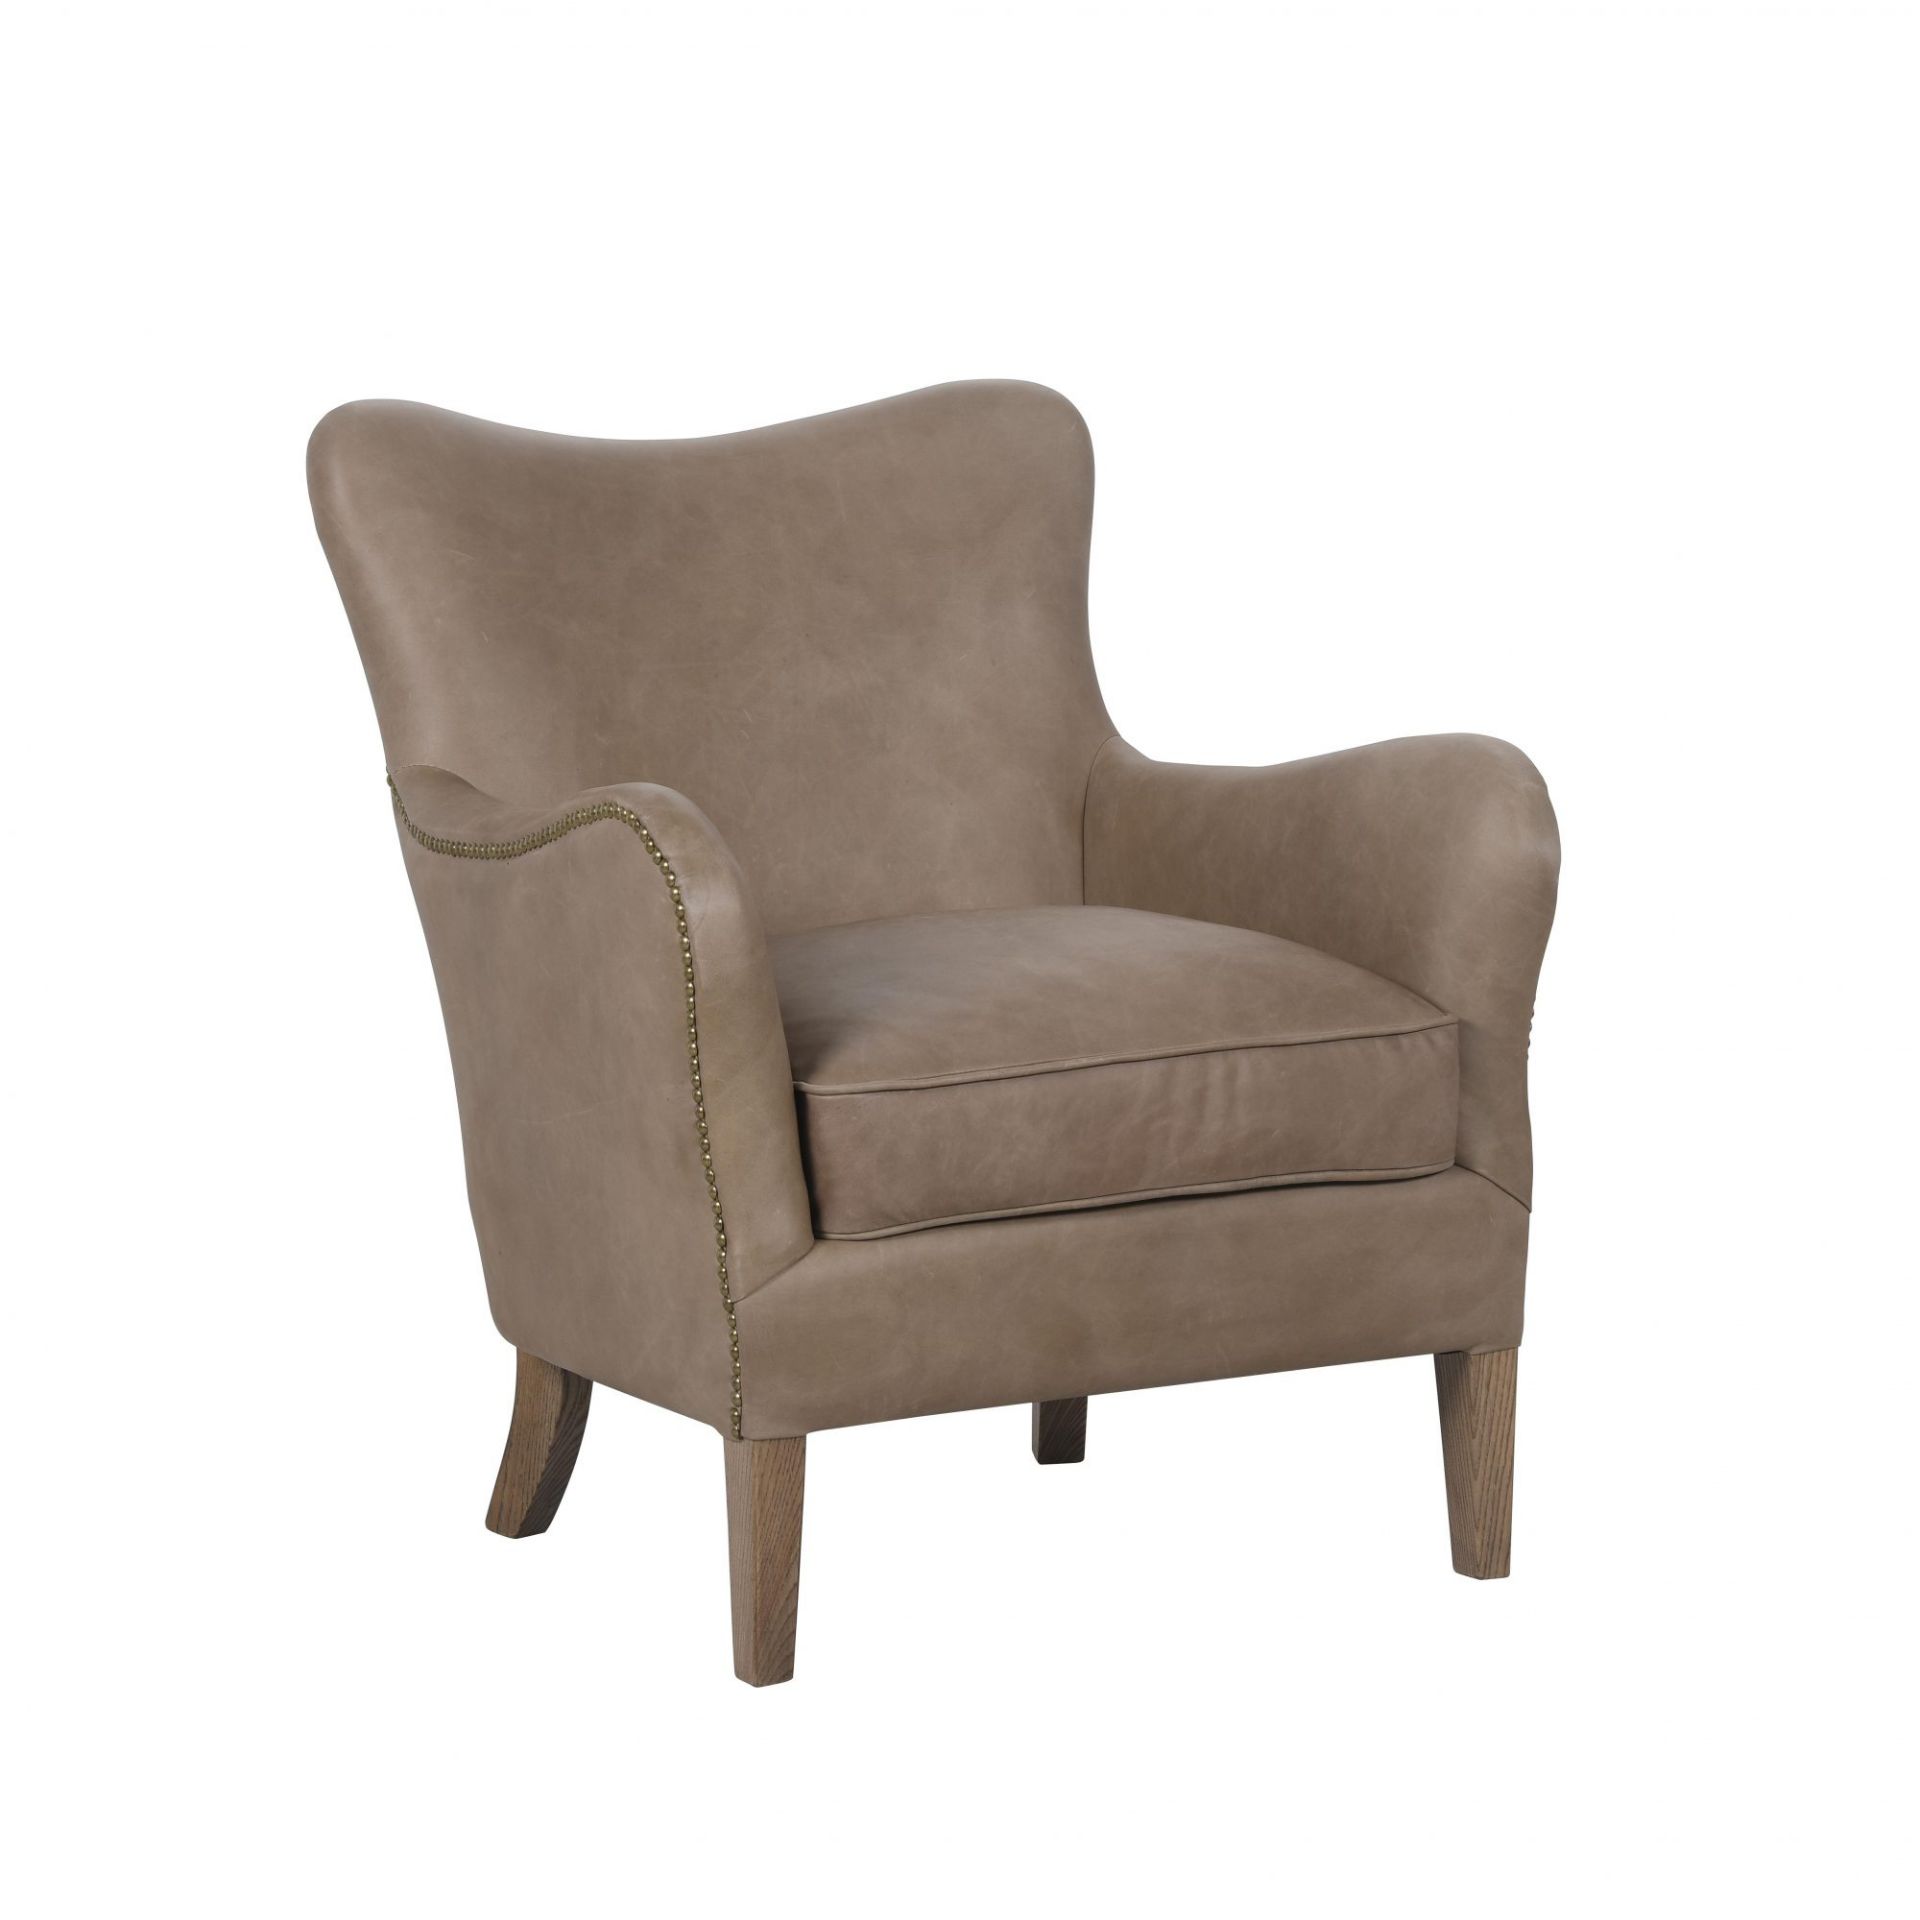 Dyce Leather Chair The Dyce Is A Mid-Century Inspired Armchair With Soft Subtle Curves, Mid-Height